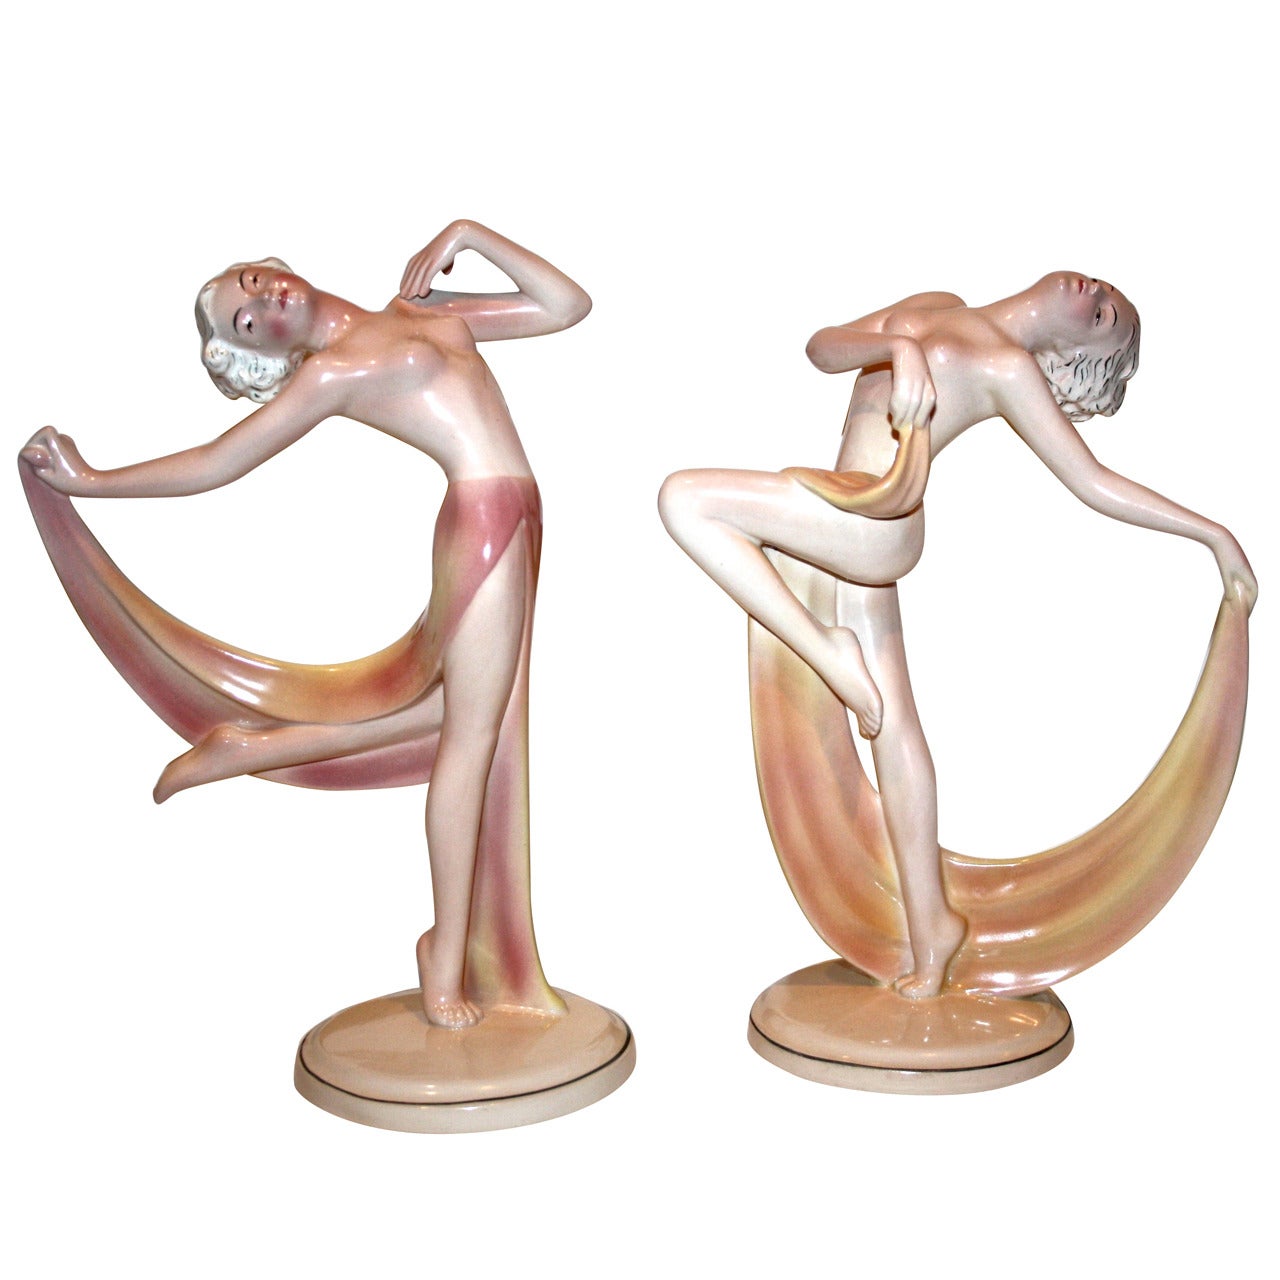 Art Deco Nude Scarf Dancers Pair By Kazhutte and Hertwig Germany, circa 1930 For Sale